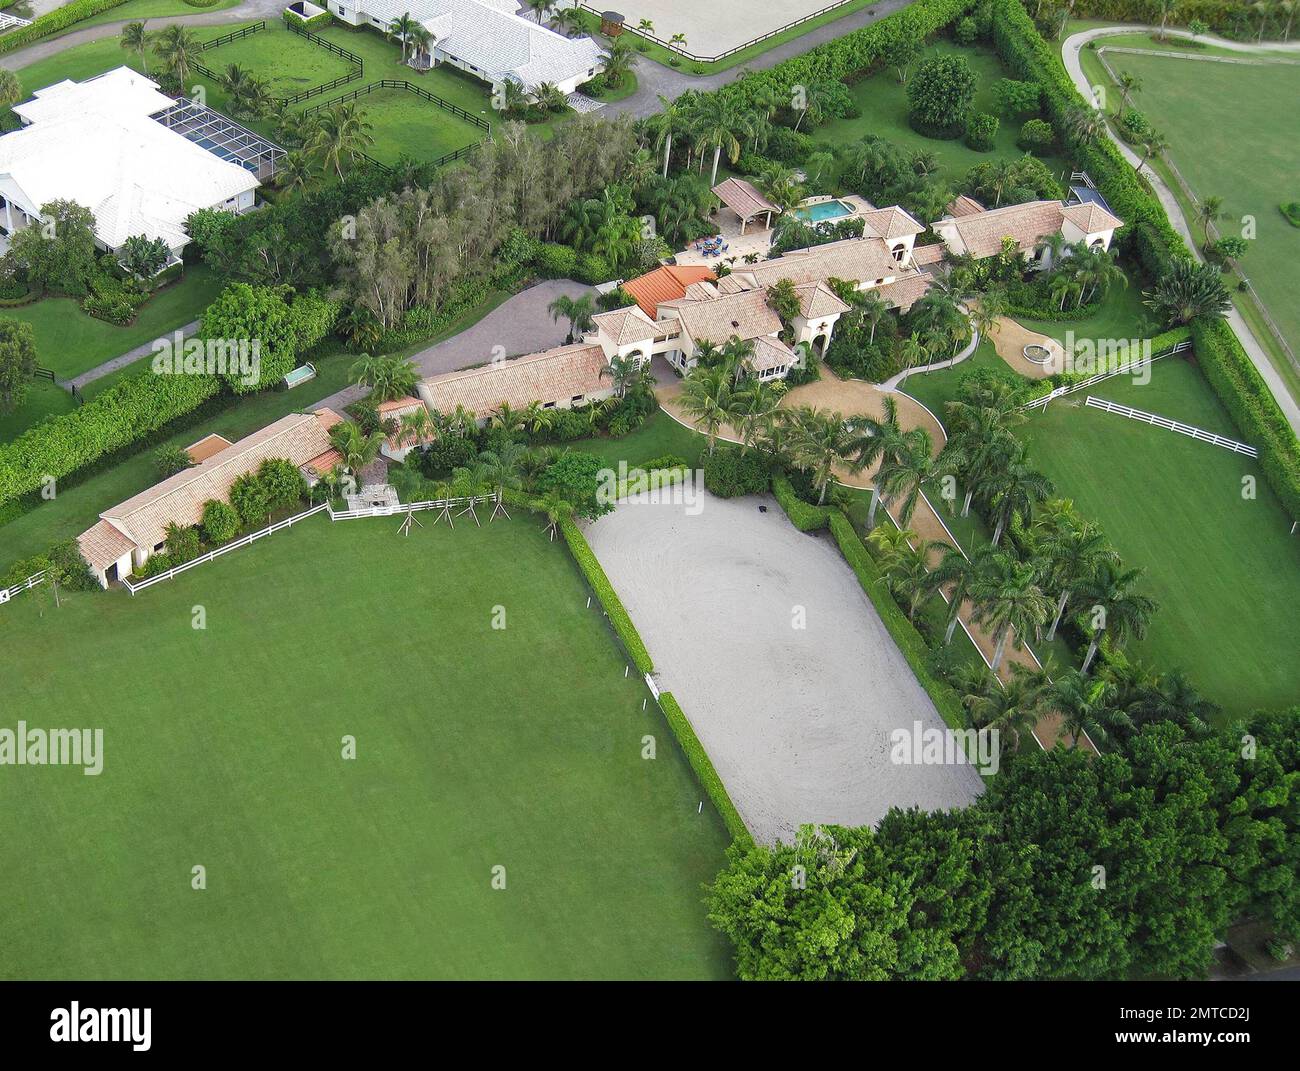 EXCLUSIVE!! Pop star Madonna is reportedly very close to purchasing an $11.9 million Tuscan-style Florida mansion.  According to reports the price of the Wellington home is down from its original listing of $13 million.  The eight-bedroom, 10,000-square-foot luxury property is situated on almost five acres of manicured, palm tree-lined land and is conveniently located beside an equestrian club.  The home also features a backyard pool and lounge area, vast dining and living rooms and horse stables.  Madonna is known to fancy the high-end sport of polo, so much so that she still rides even after Stock Photo